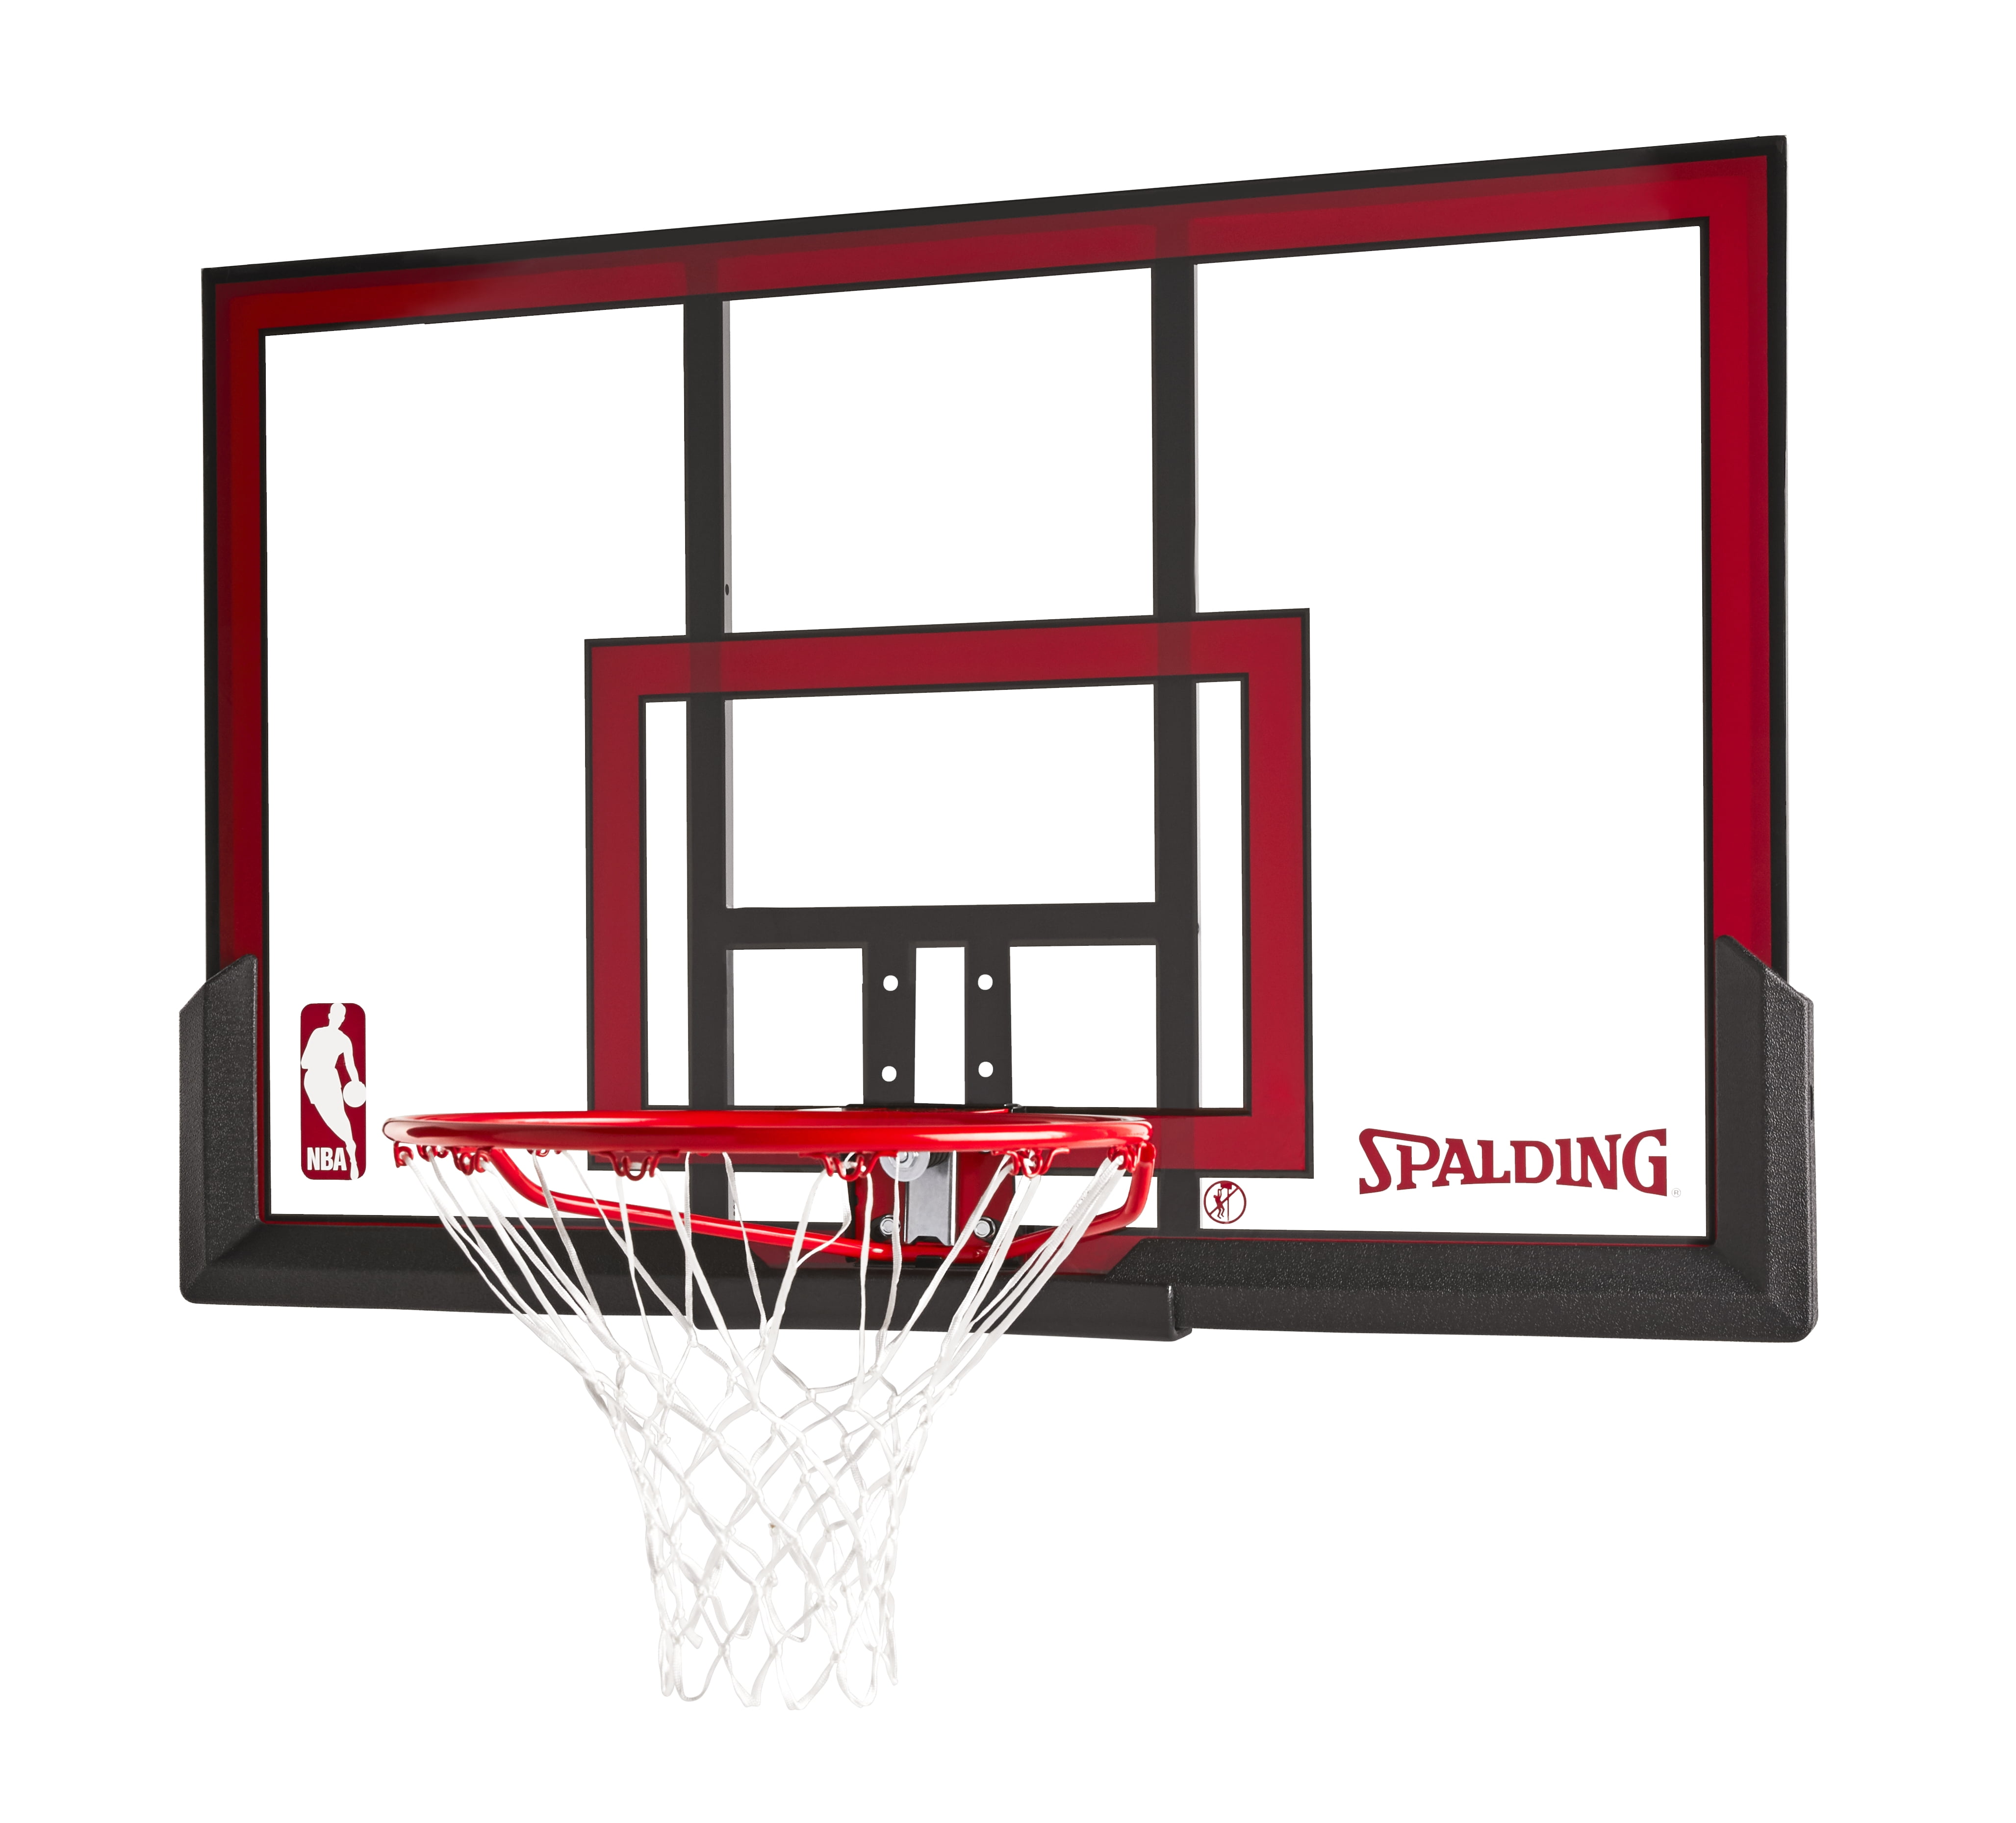 Spalding 54" Backboard and Rim Combo for sale online 